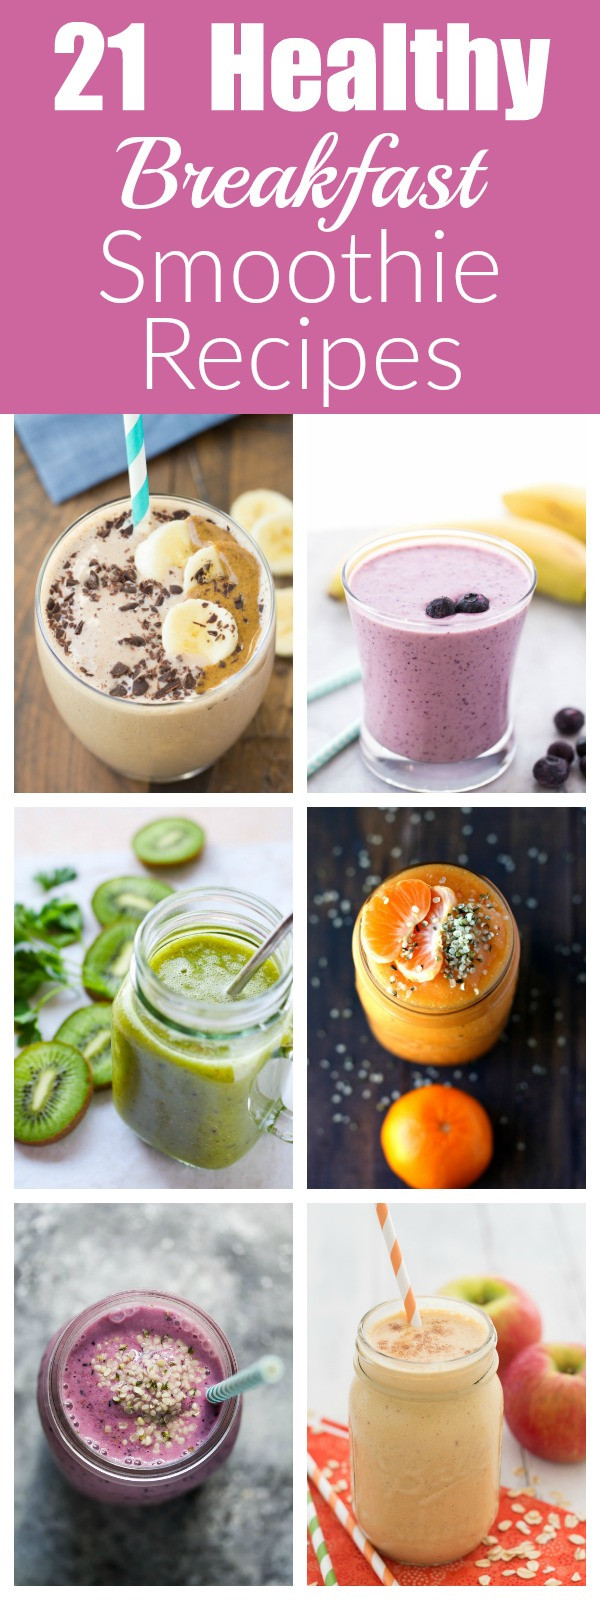 Breakfast Smoothies Healthy
 21 Healthy Breakfast Smoothie Recipes